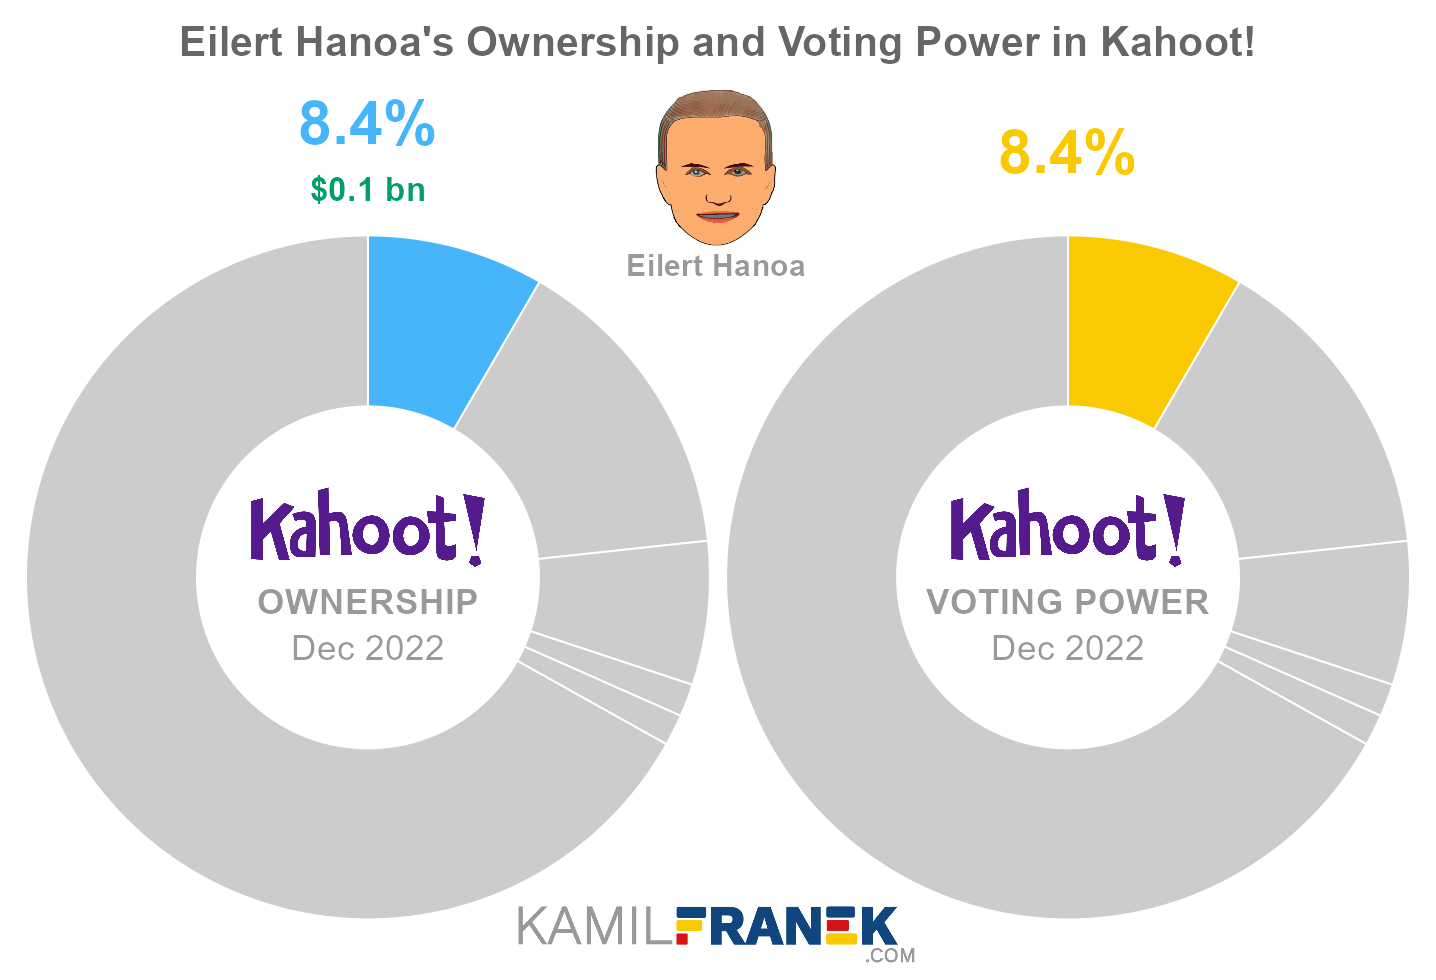 Eilert Hanoa's share ownership and voting power in Kahoot! (chart)